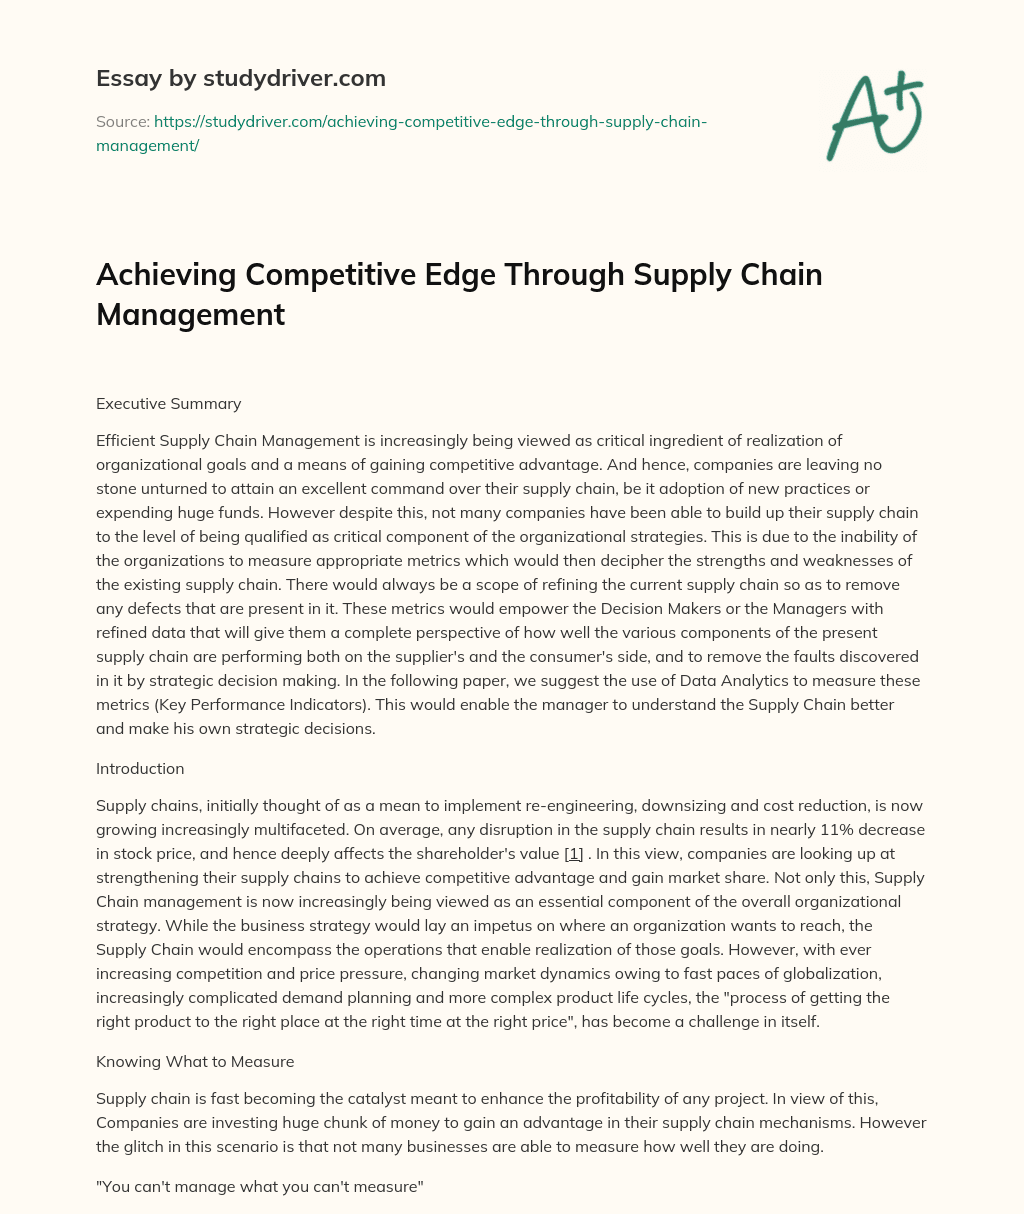 Achieving Competitive Edge through Supply Chain Management essay